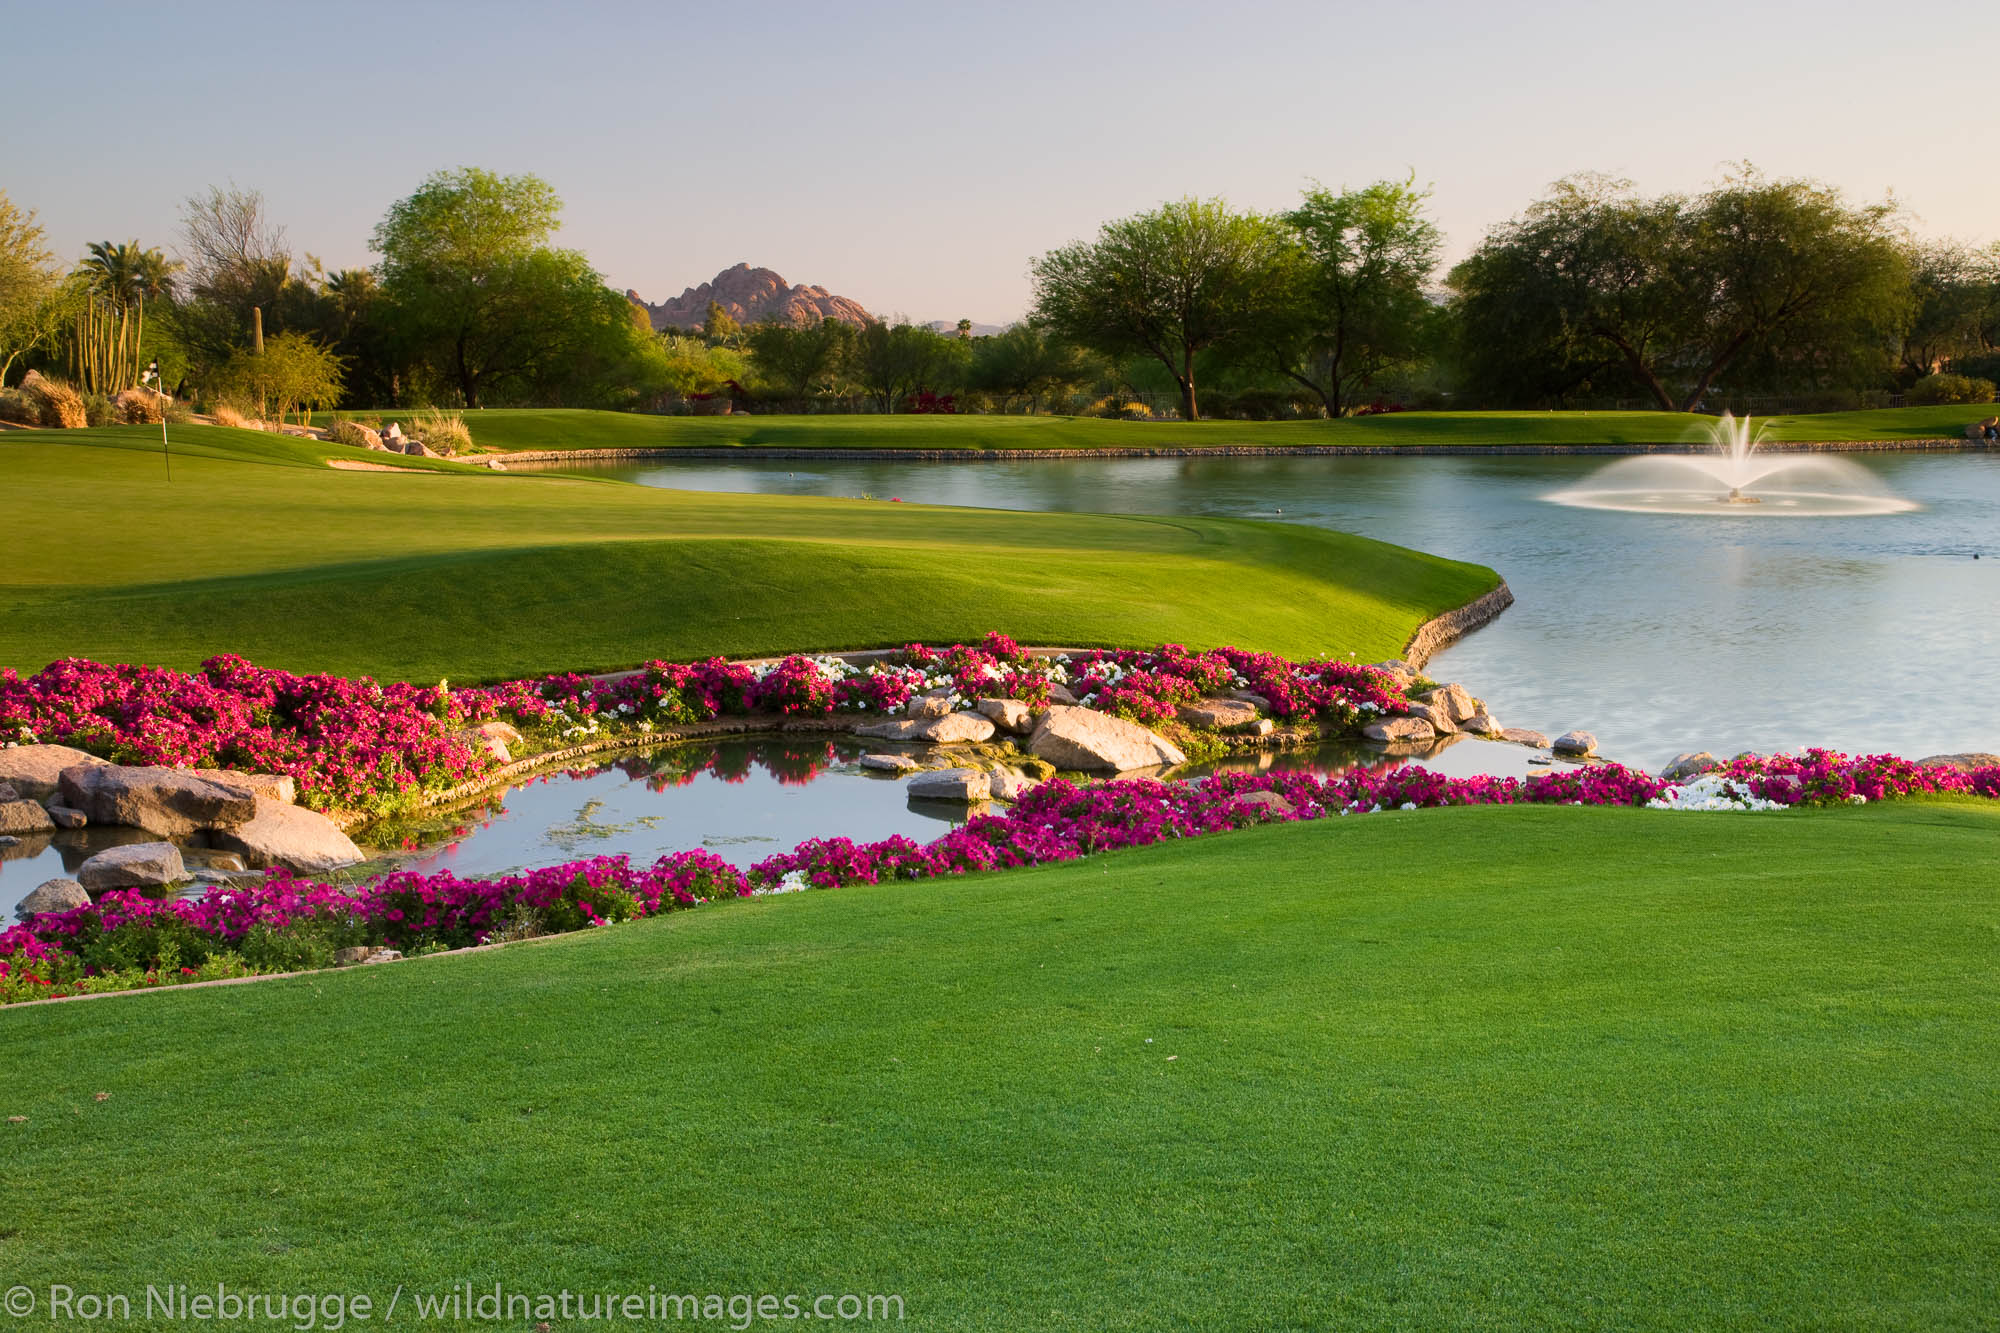 The 7th hole on the Canyon Golf Course at the Phoenician Resort in Scottsdale, Arizona.